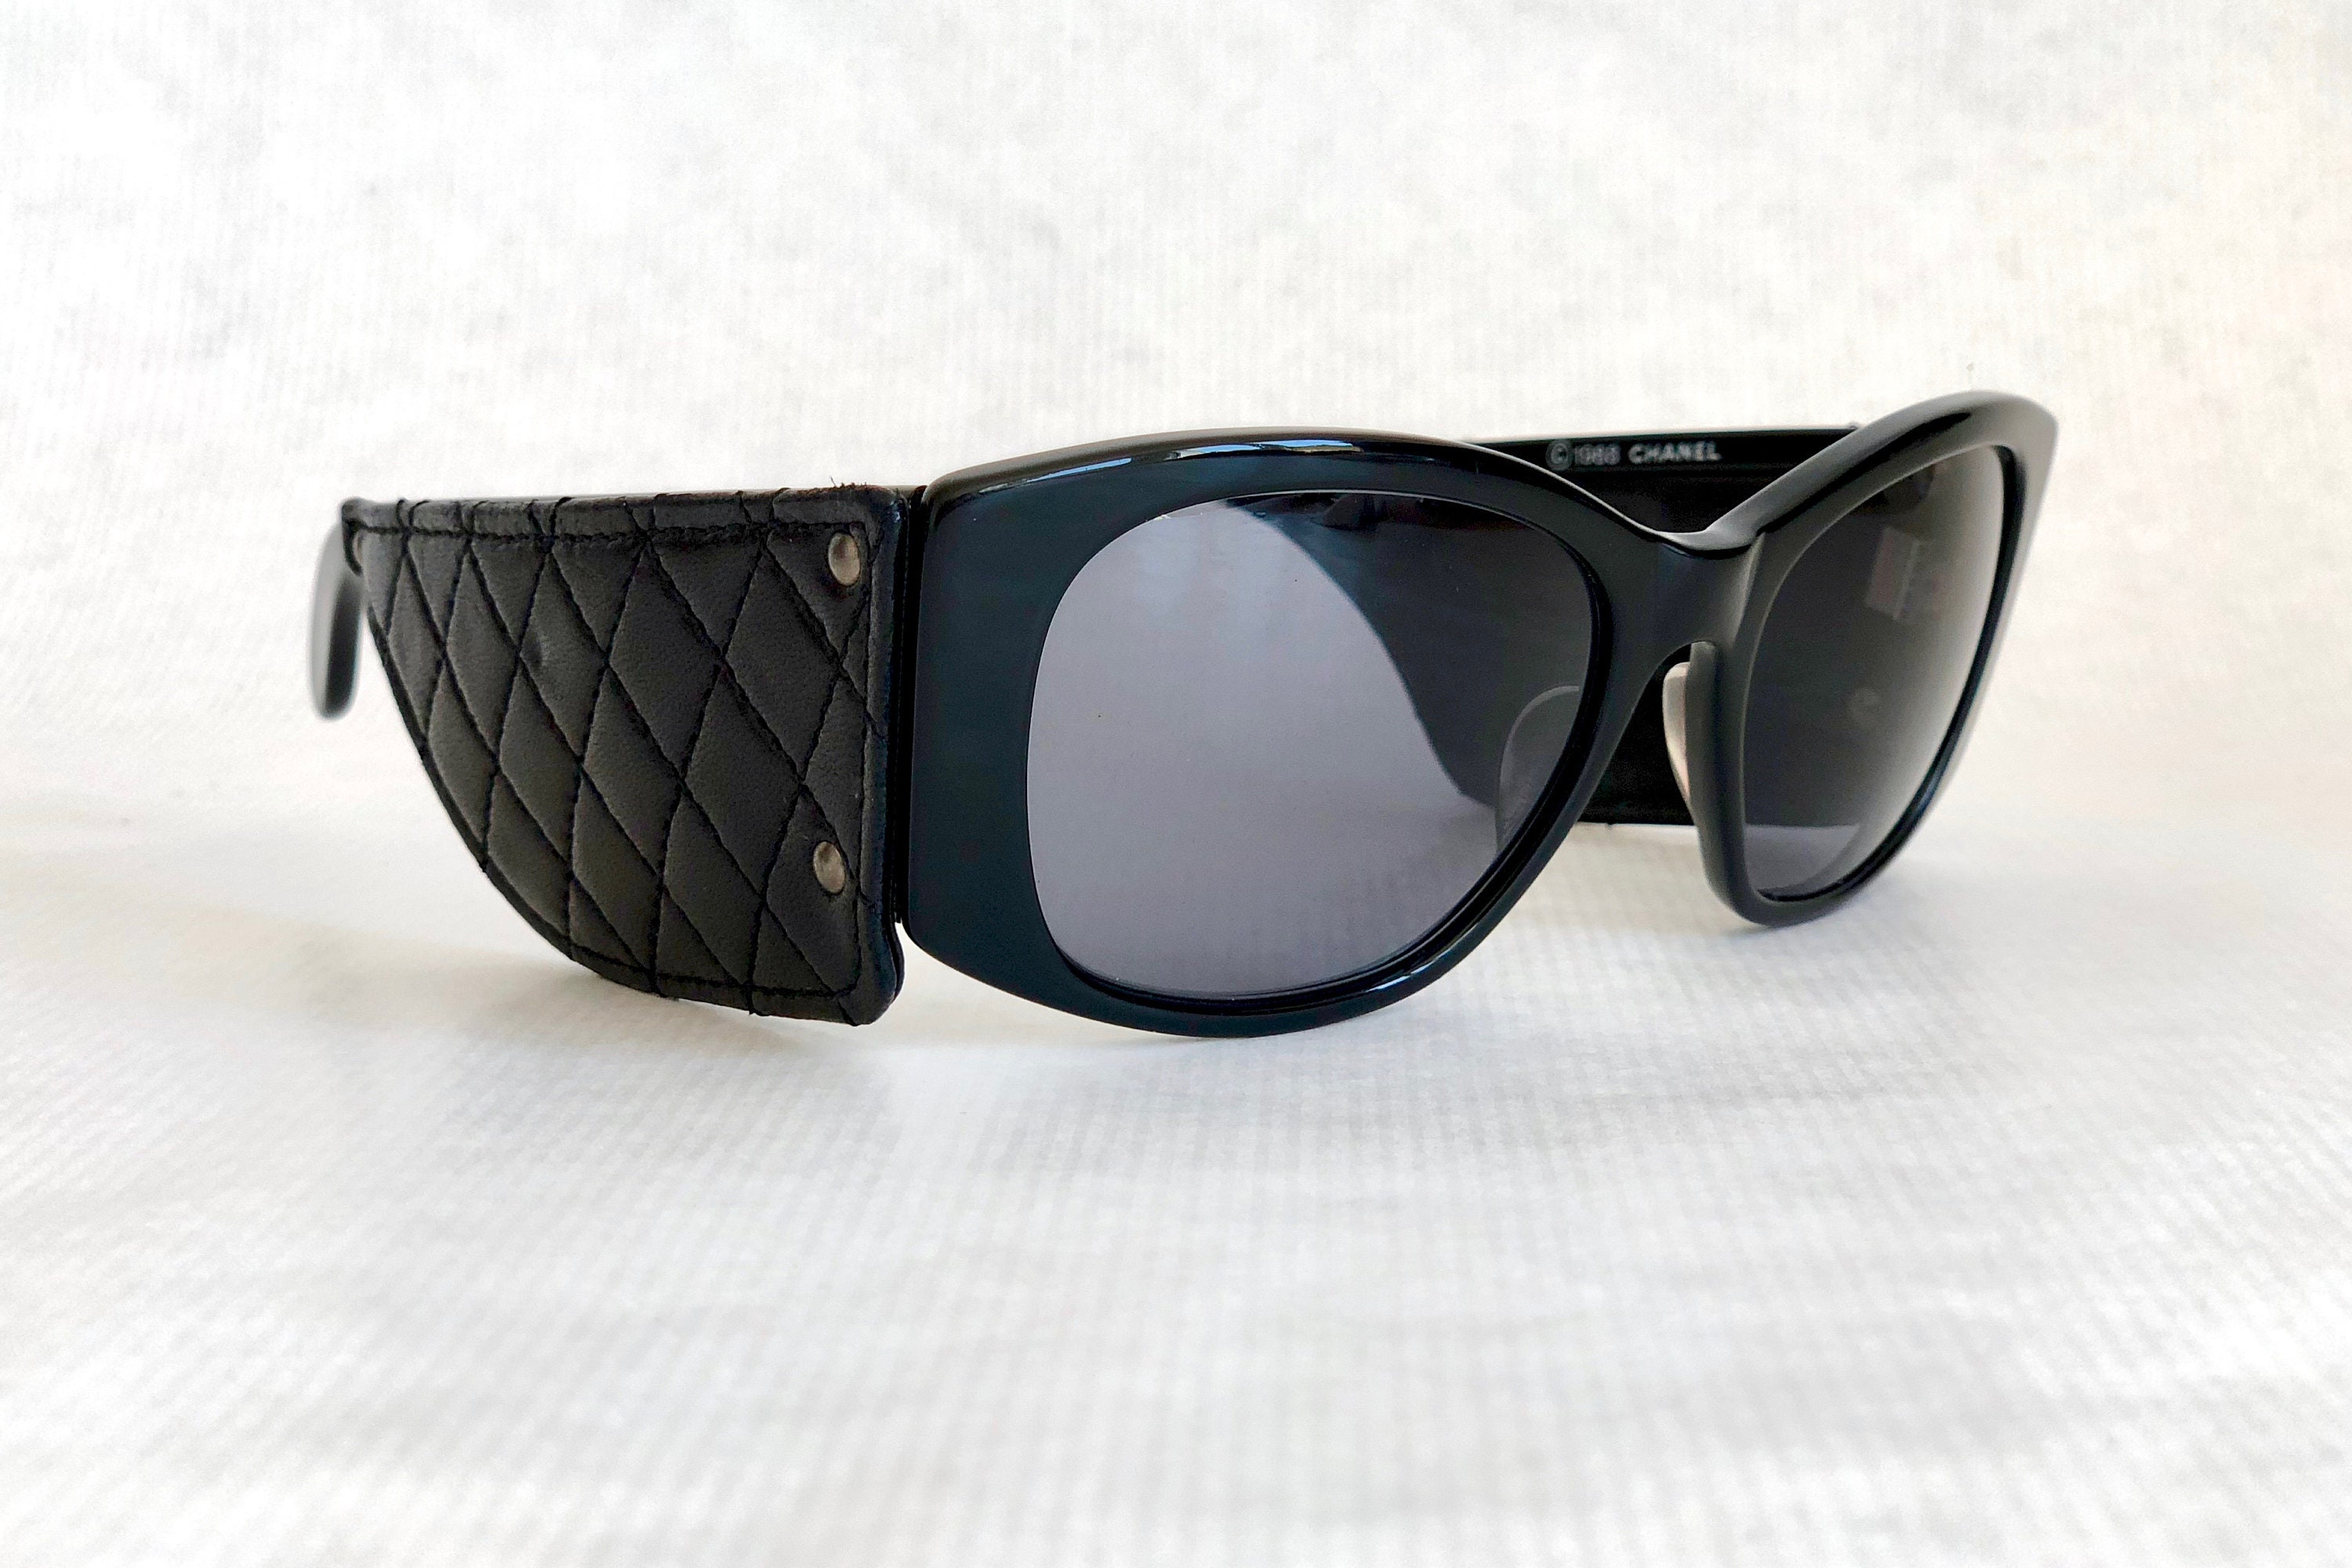 Chanel Black Quilted Leather Sunglasses  Chanel black, Quilted leather,  Sunglasses accessories